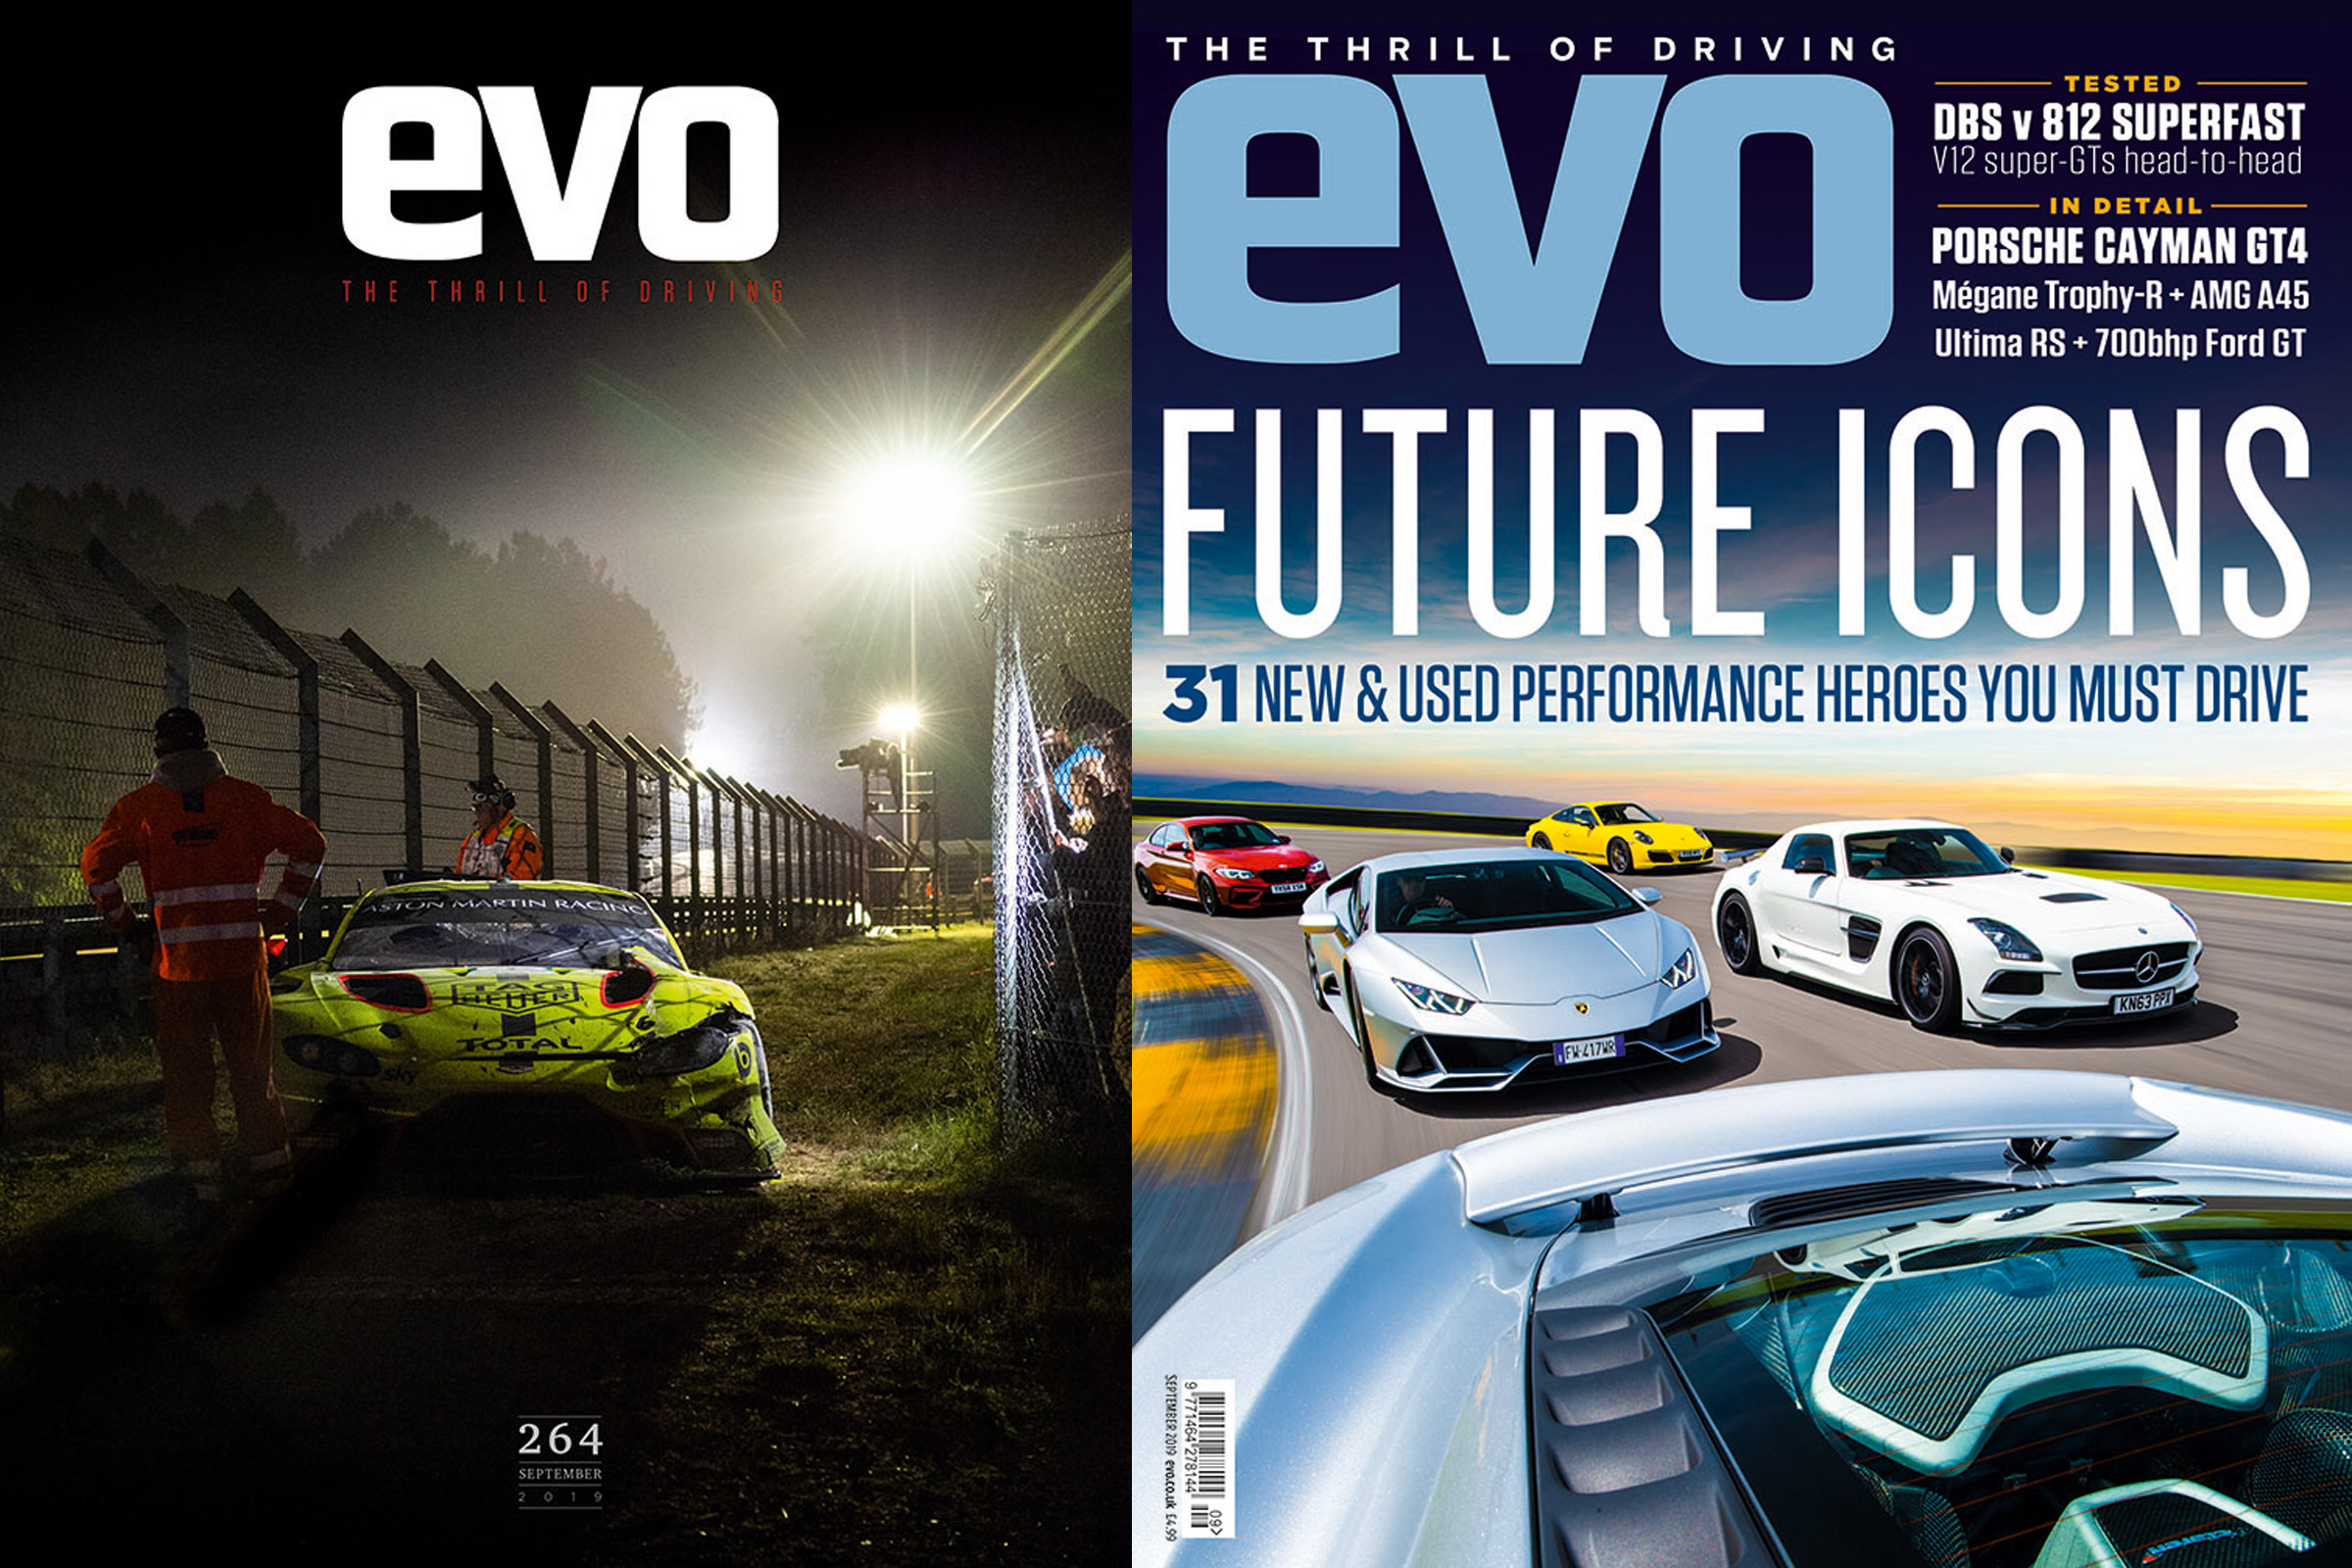 2002-2015 Various Issues of EVO Magazine from #46 to #207 